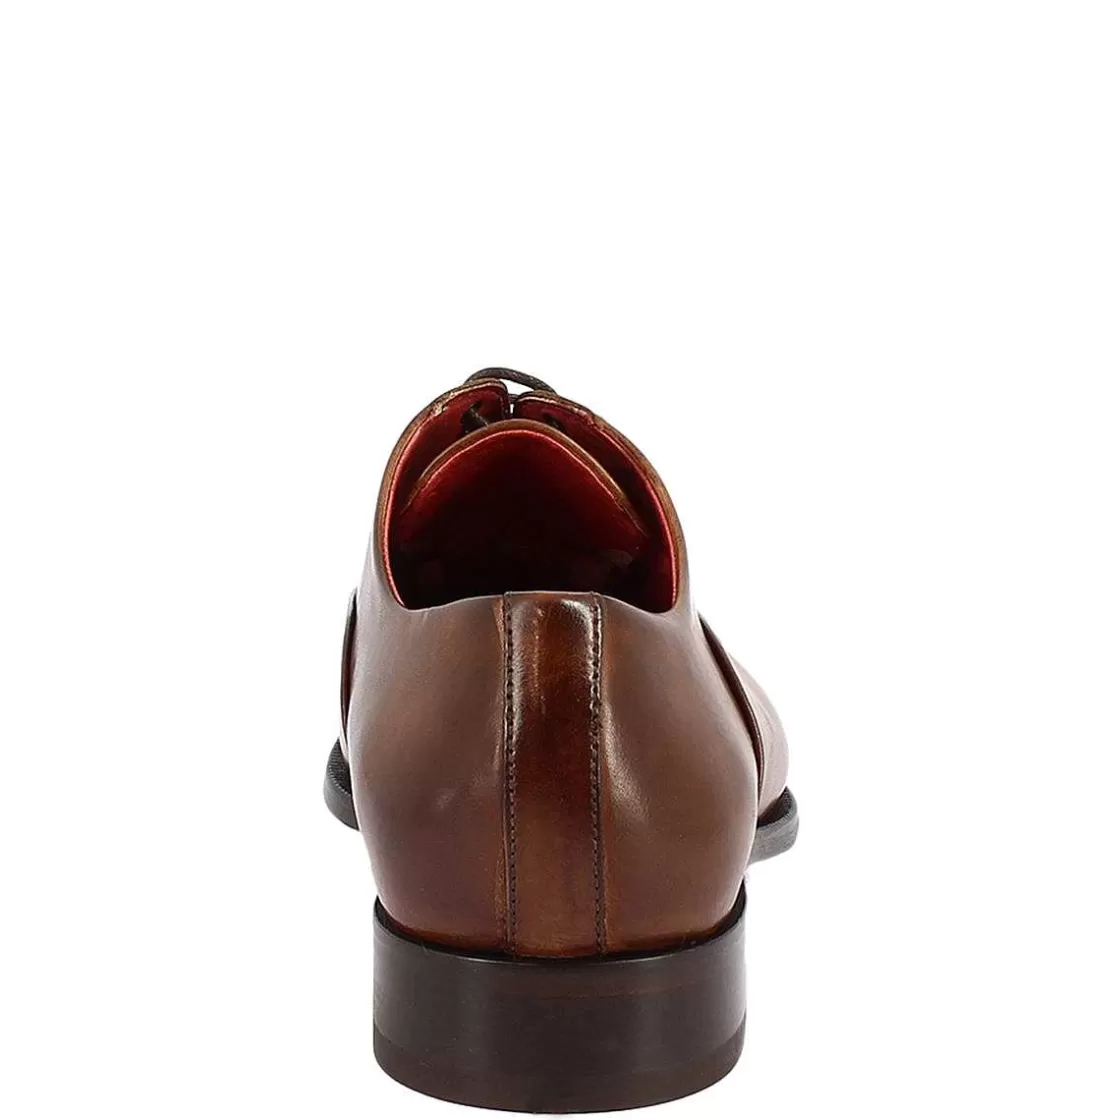 Leonardo Oxford Shoes With Toe Cap In Brandy-Colored Leather Clearance